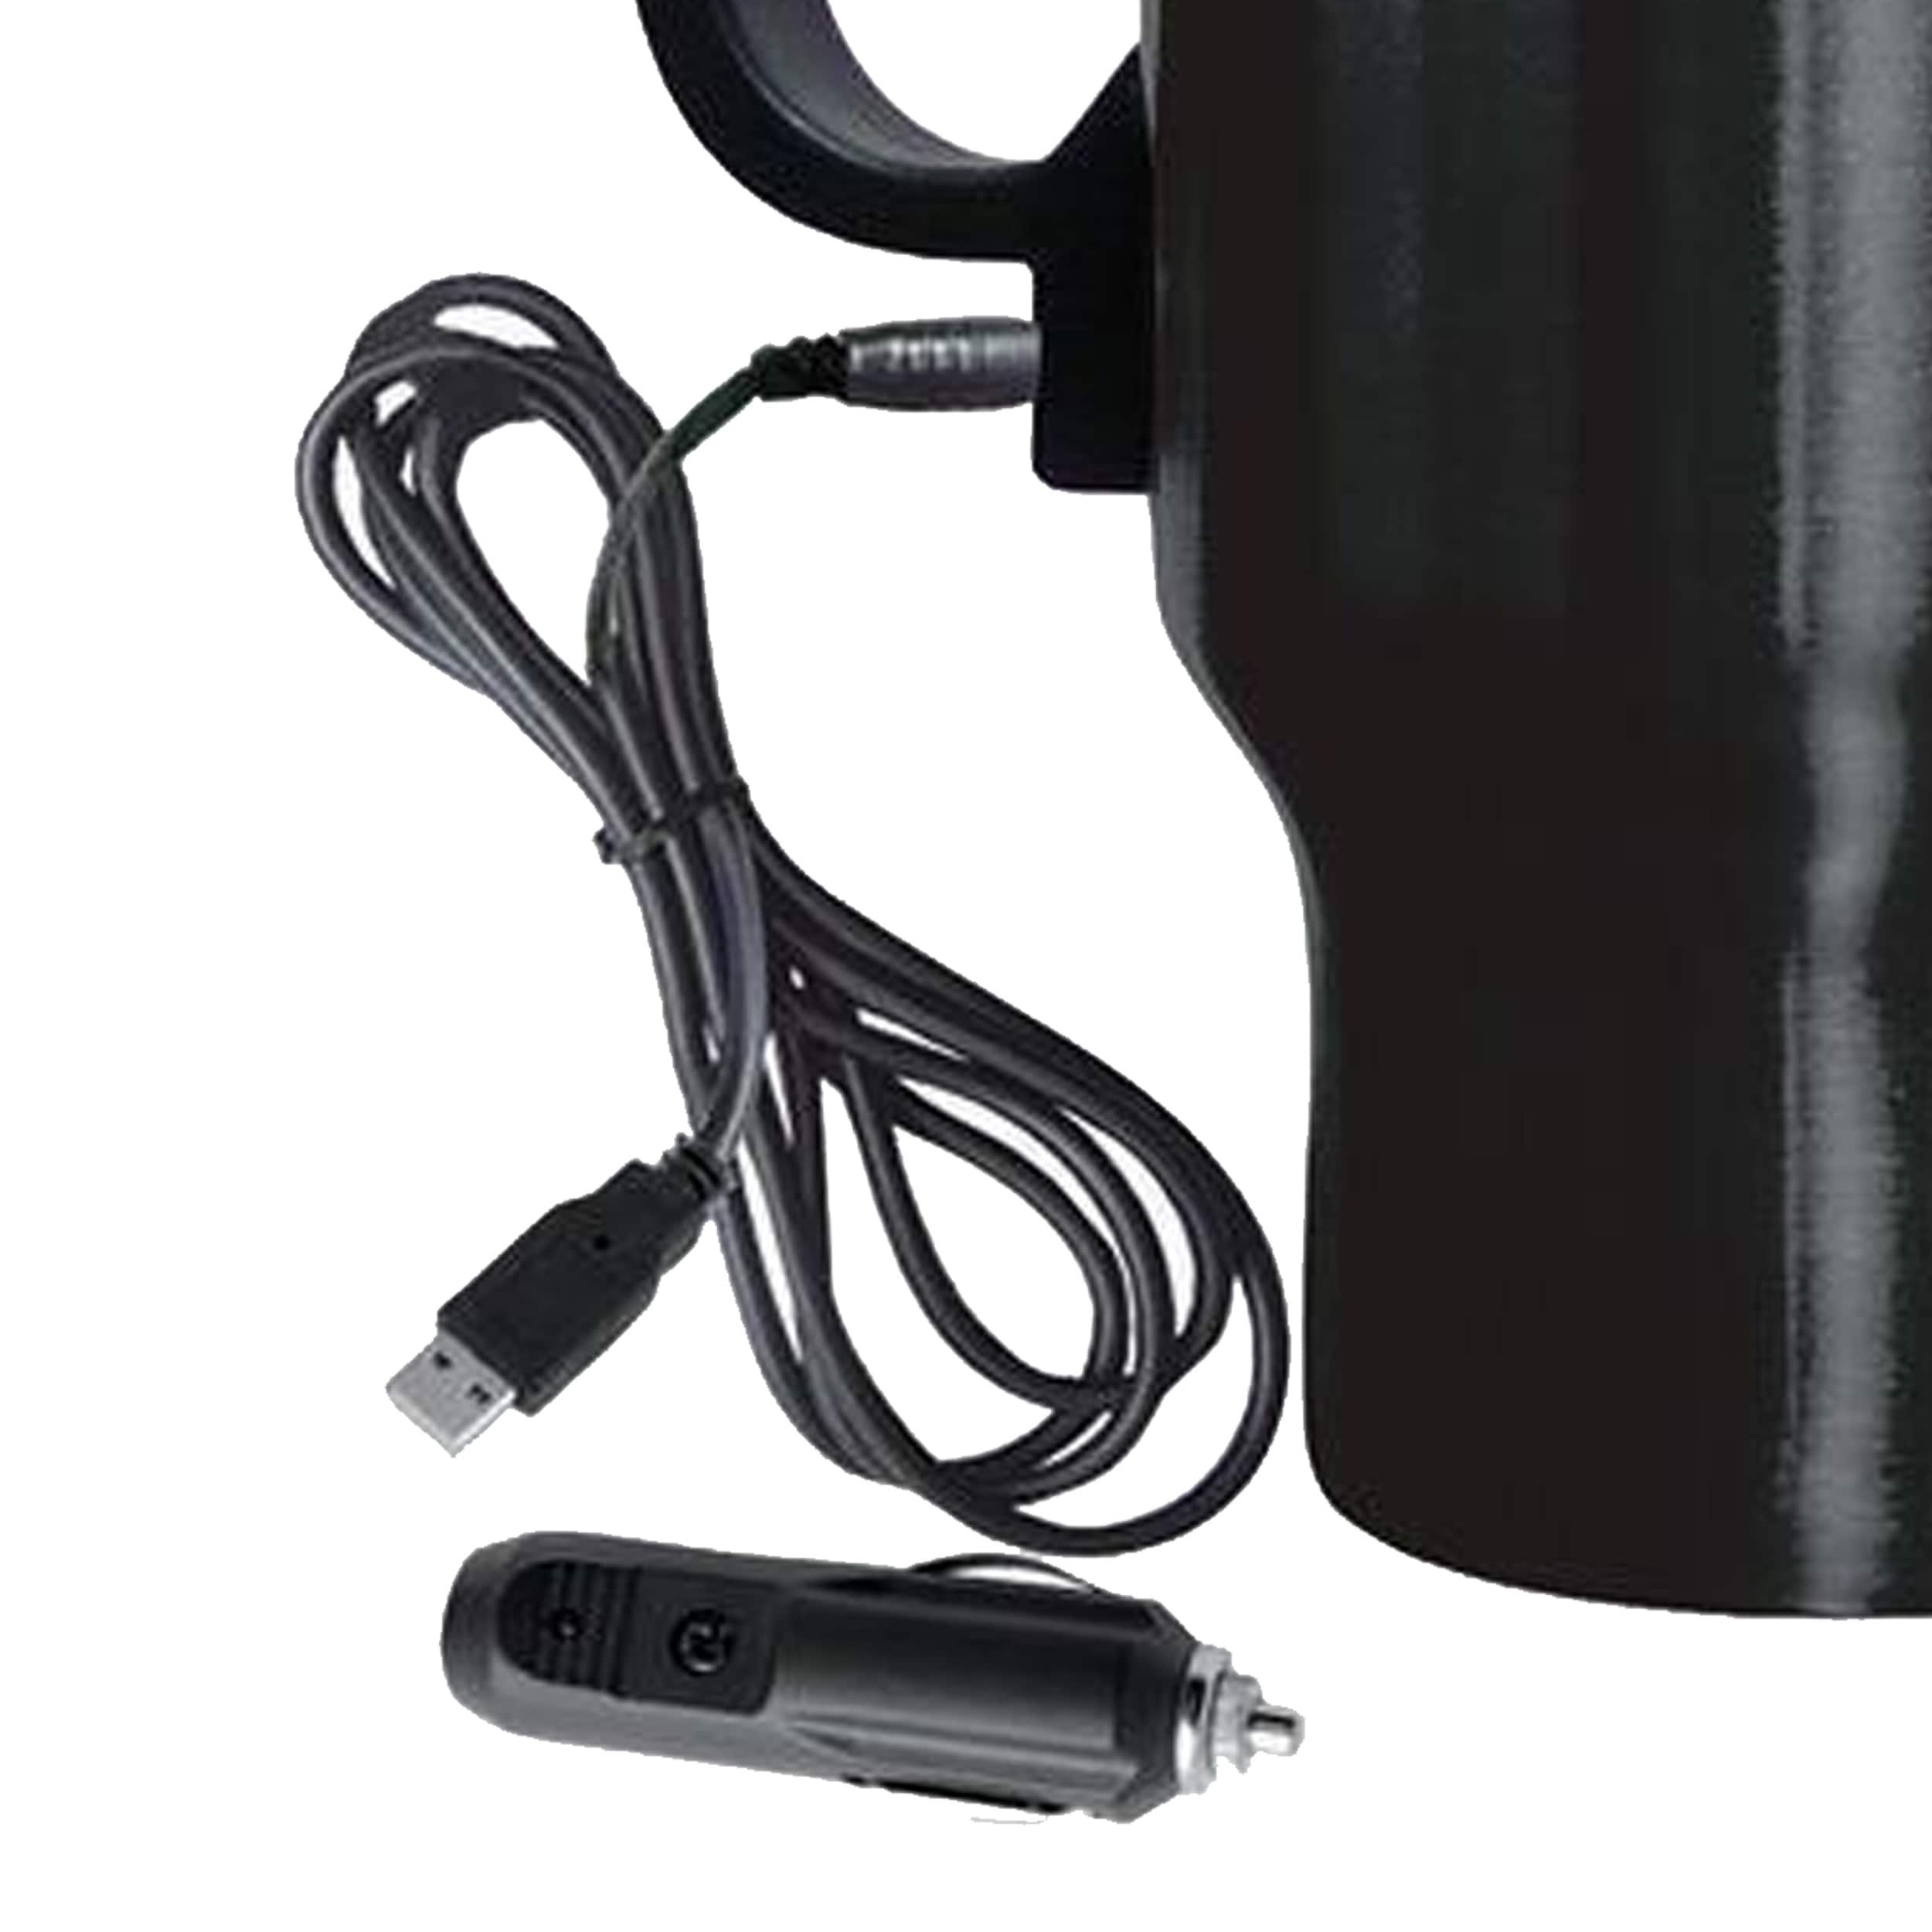 Brentwood CMB-16B Stainless Steel 16oz 12 Volt Heated Travel Mug, Blac -  Brentwood Appliances